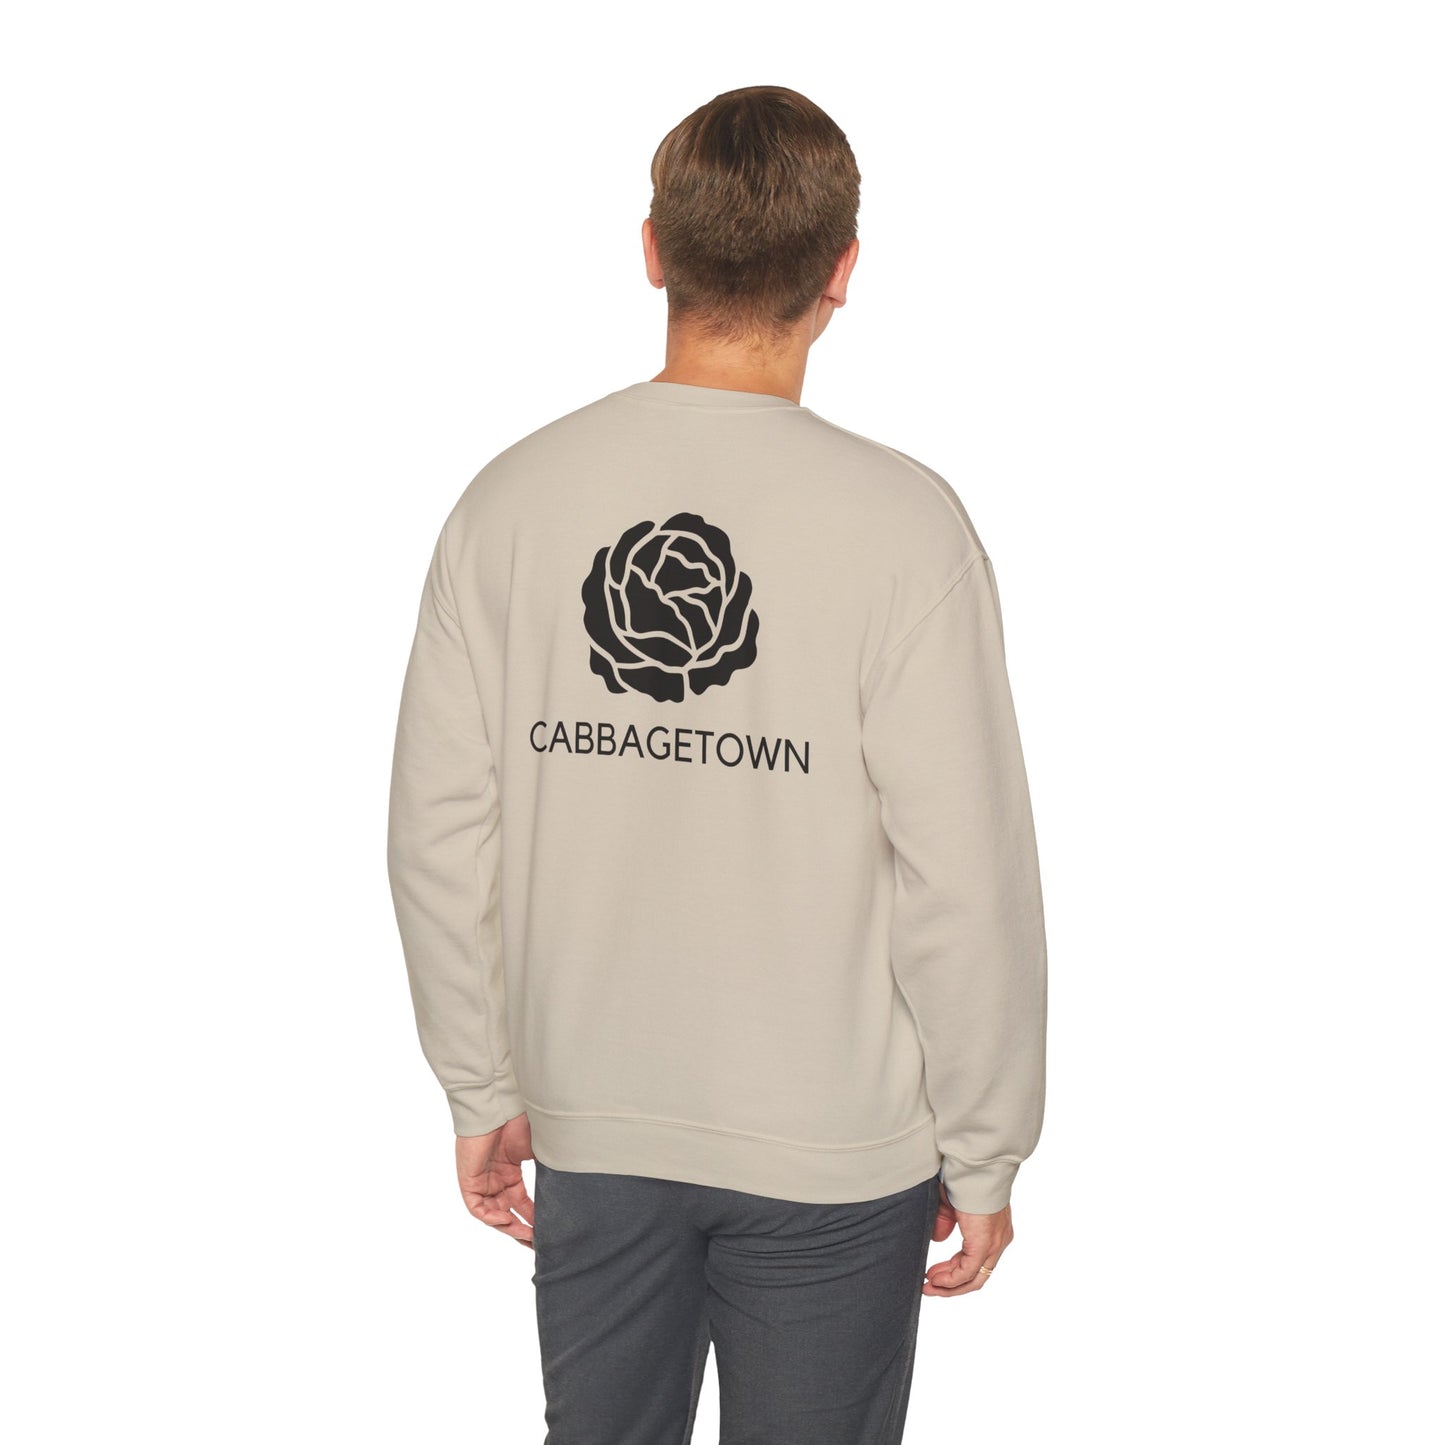 Man viewed from the back wearing a beige Unisex Heavy Blend™ Crewneck Monochrome Logo and Cabbagetown Sweatshirt with a black "Toronto Cabbagetown" logo and a stylized cabbage graphic above the text by Printify.